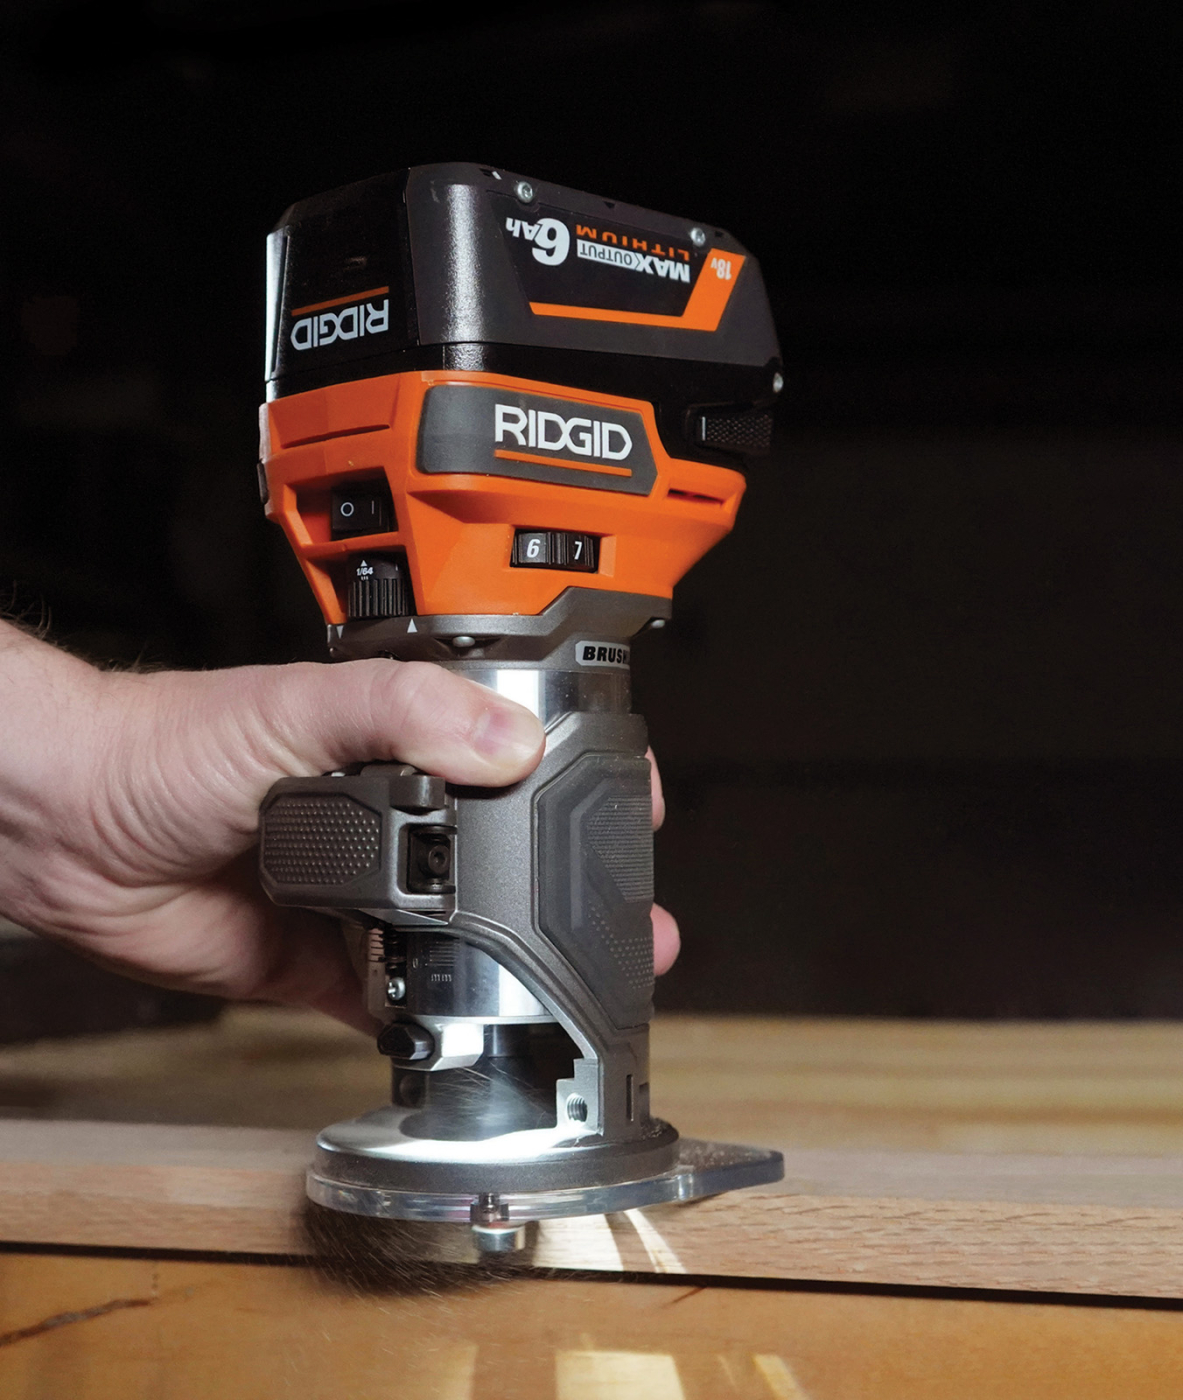 Black & Decker Cordless Wizard Rotary Tool - tools - by owner